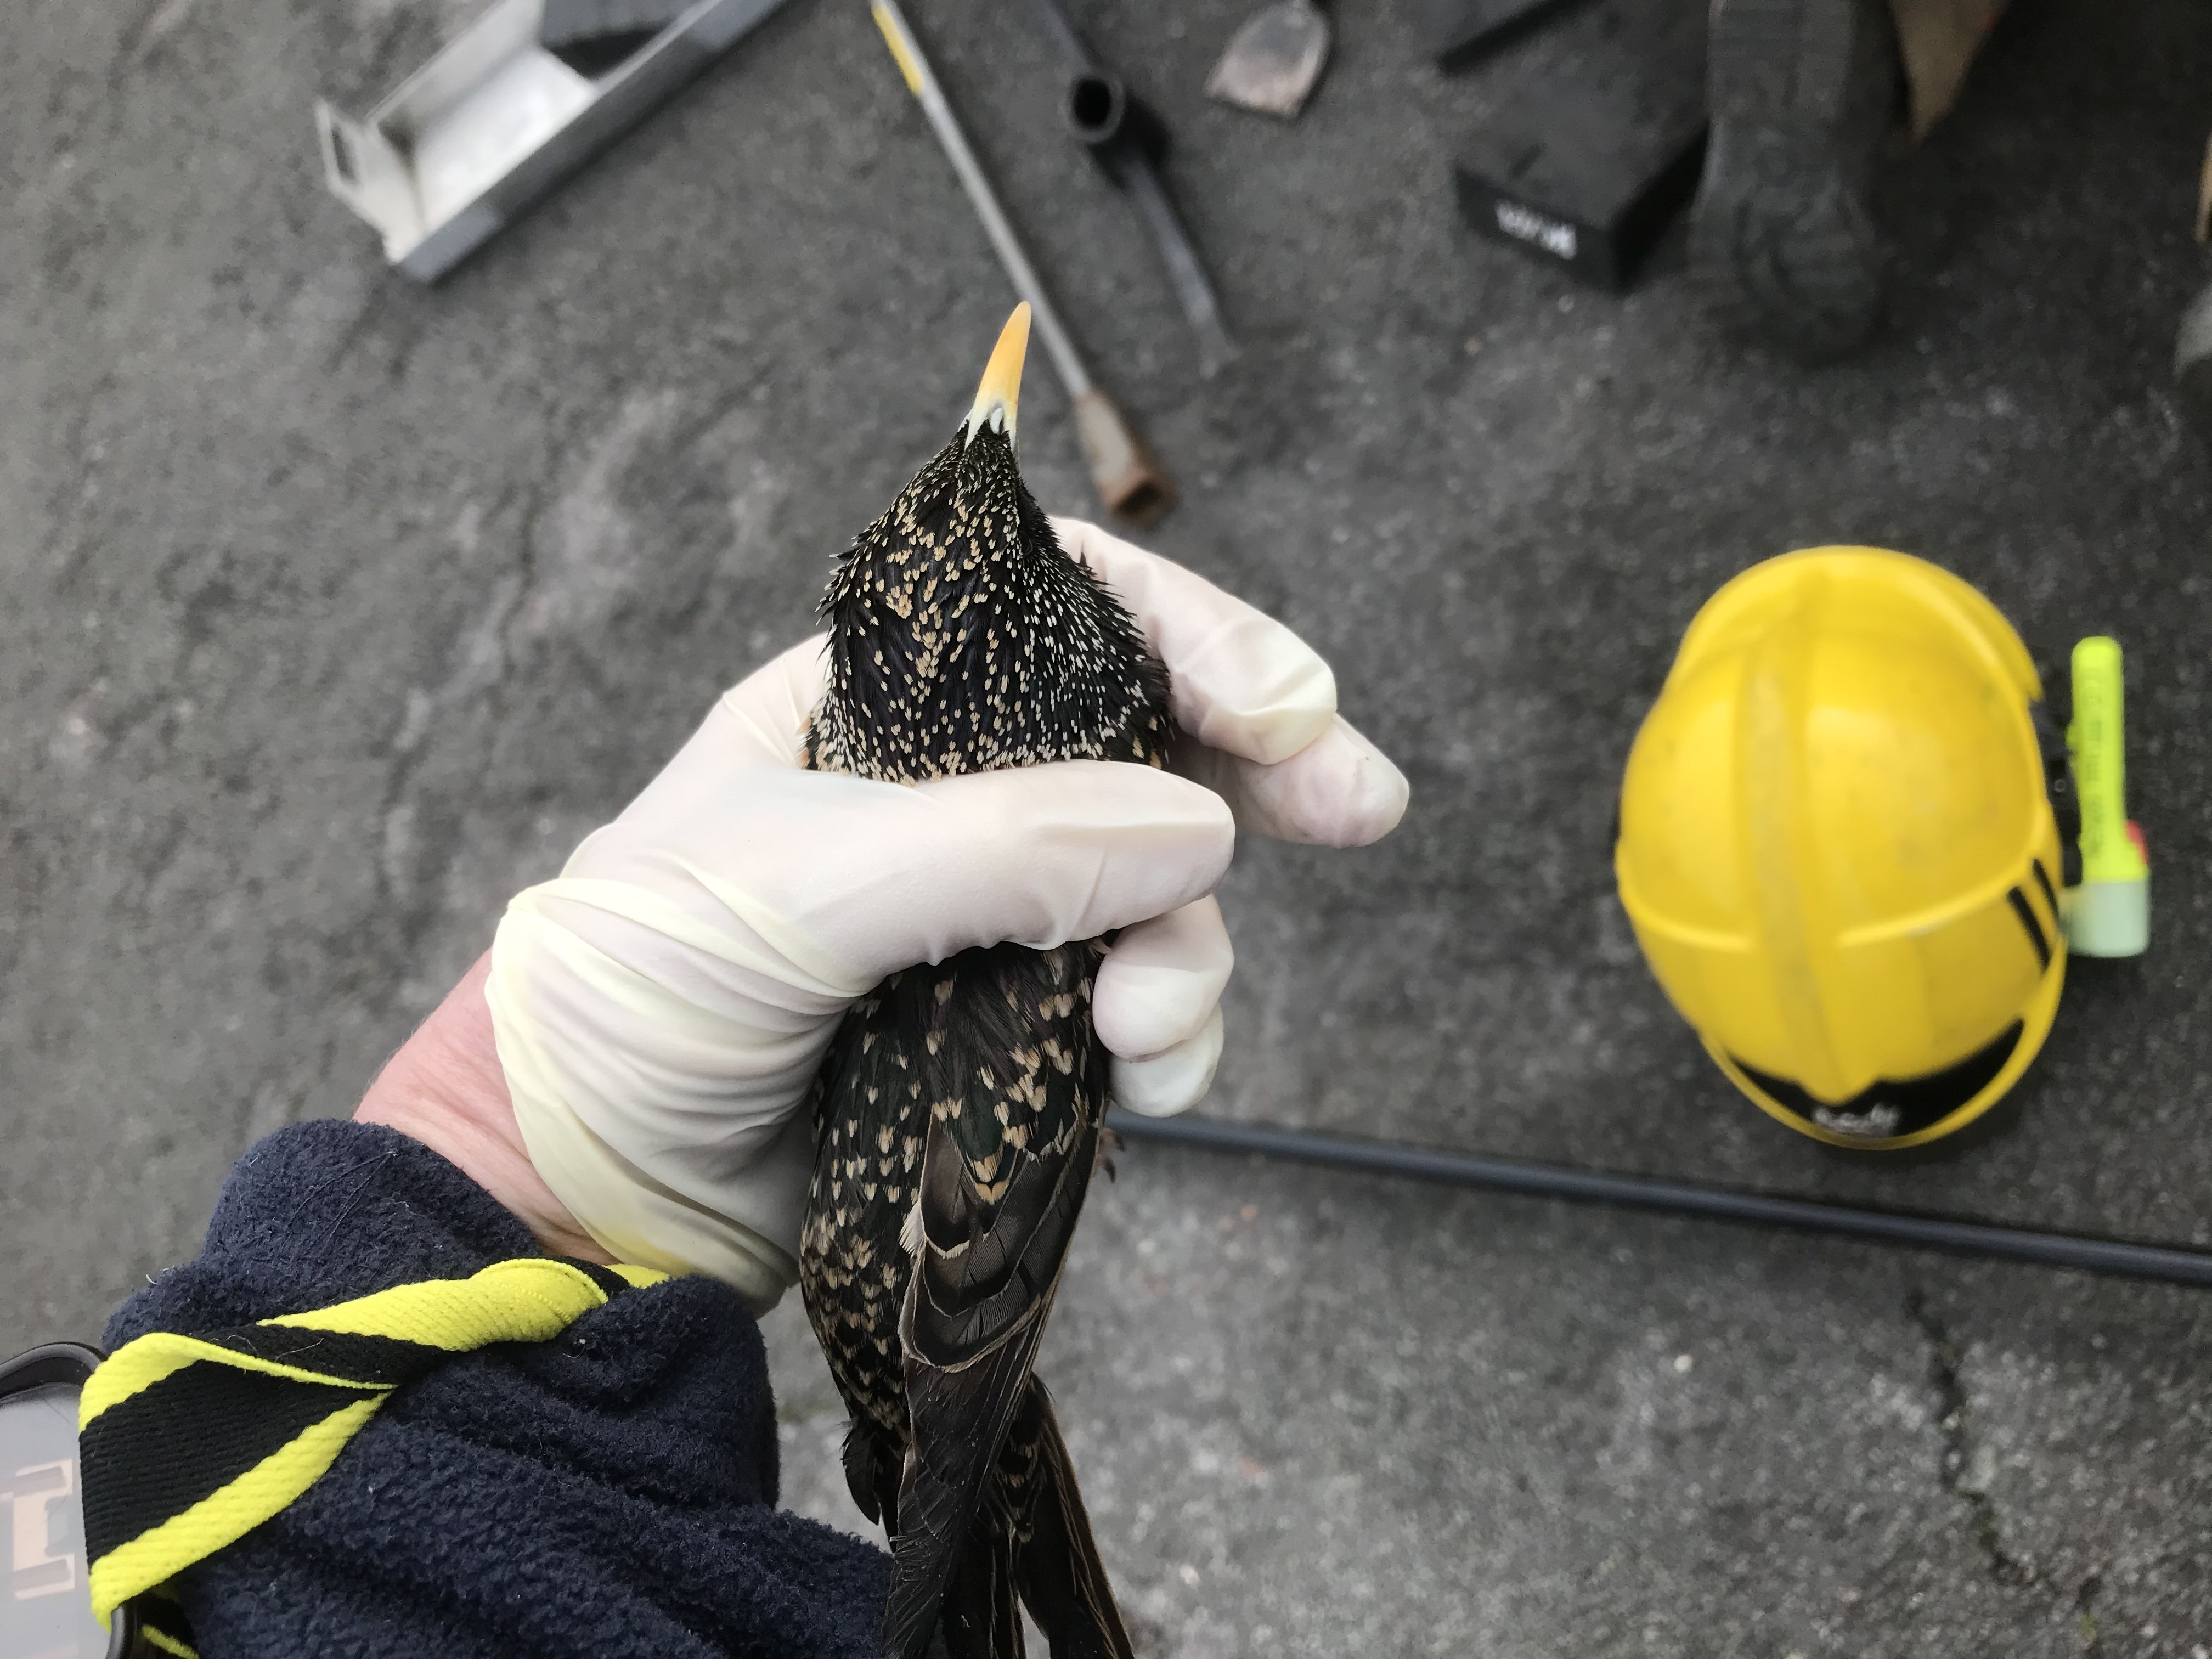 A starling rescued from a drain